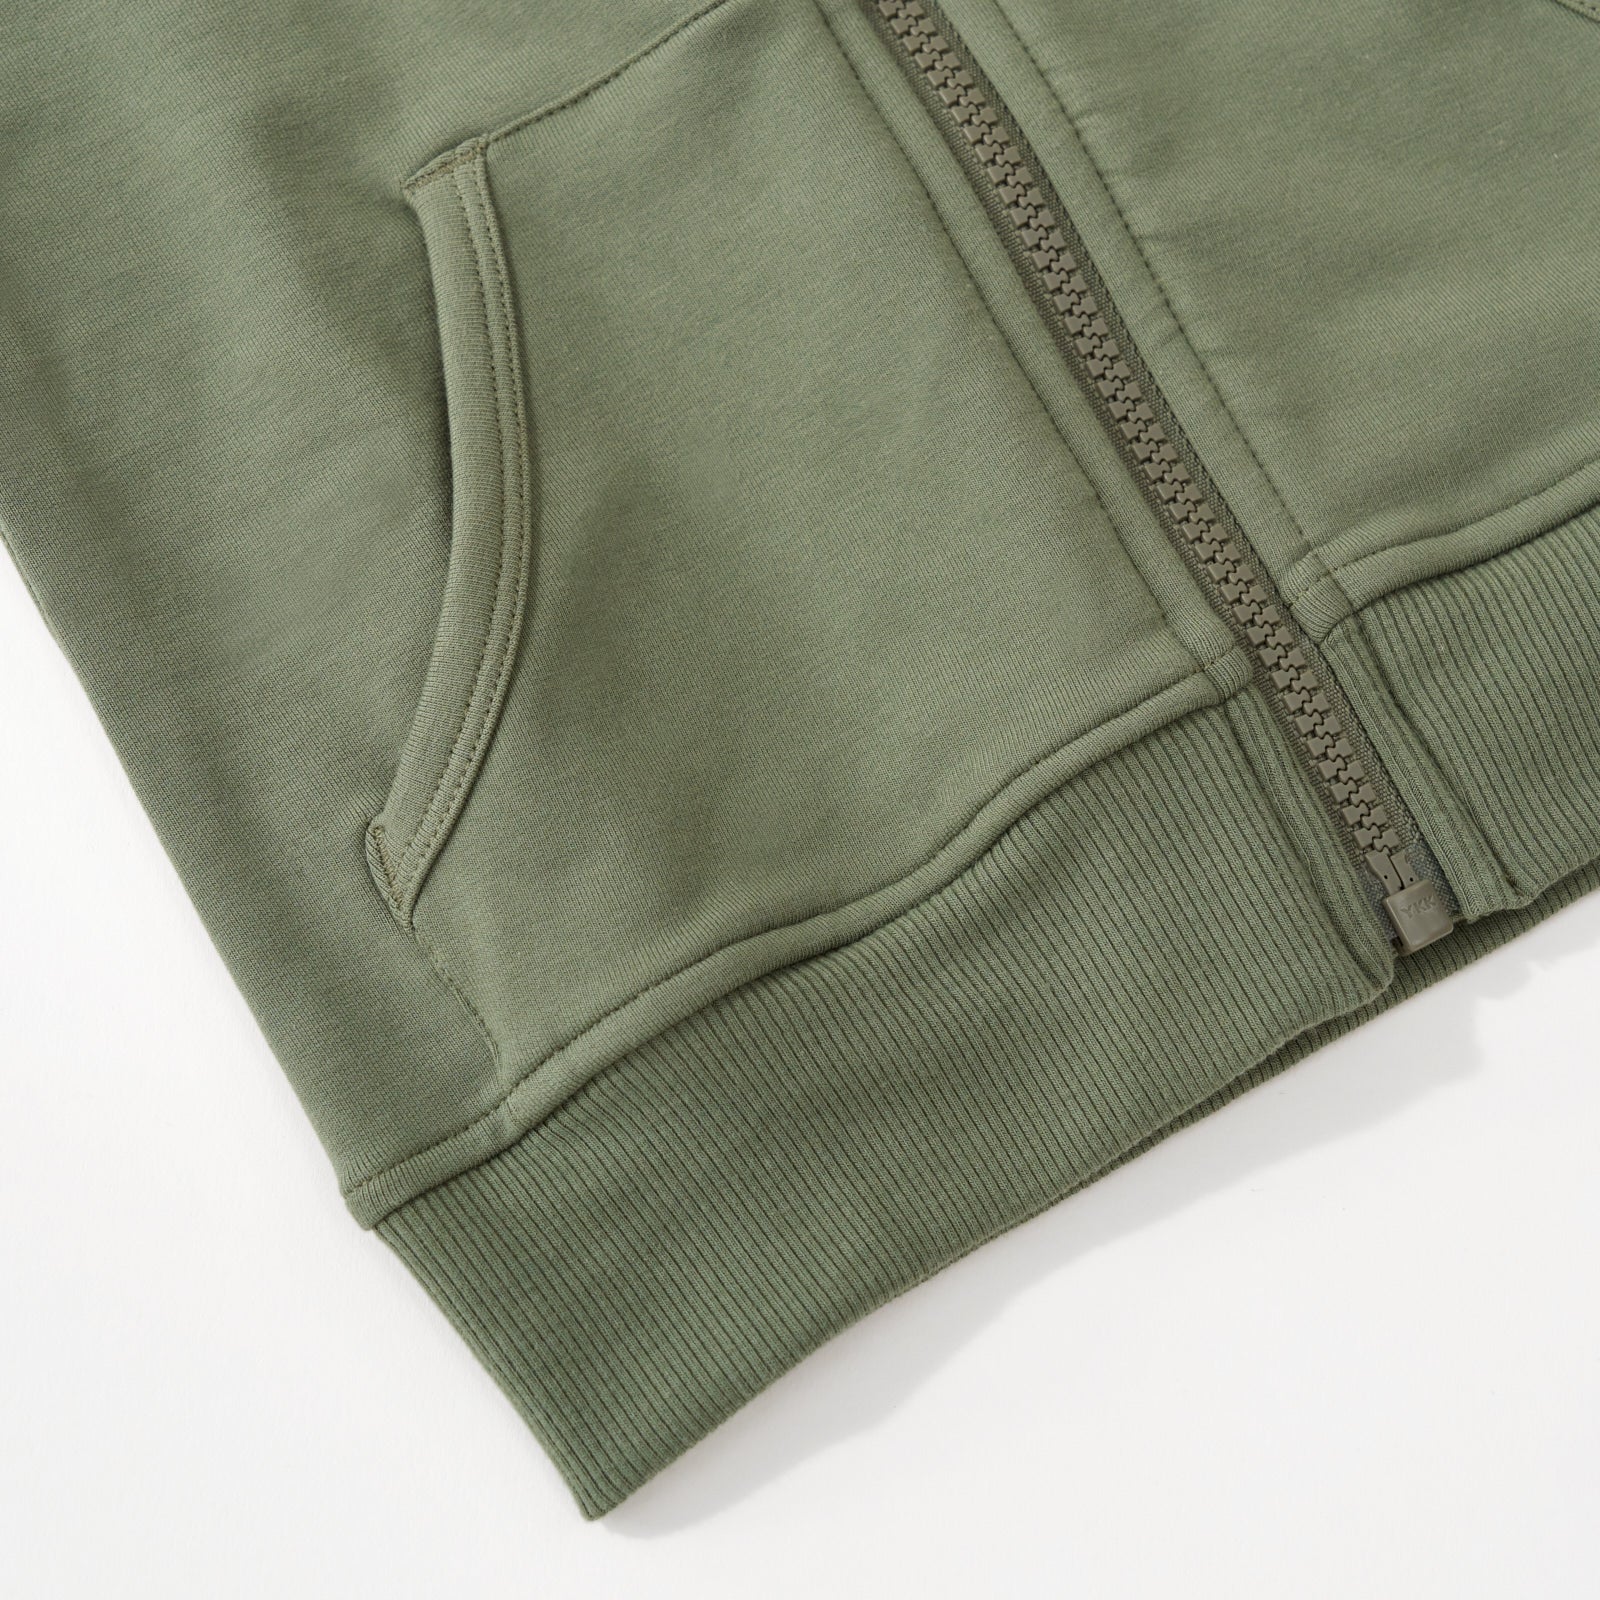 Close up image of the zipper detail for the Moss Zip Hoodie